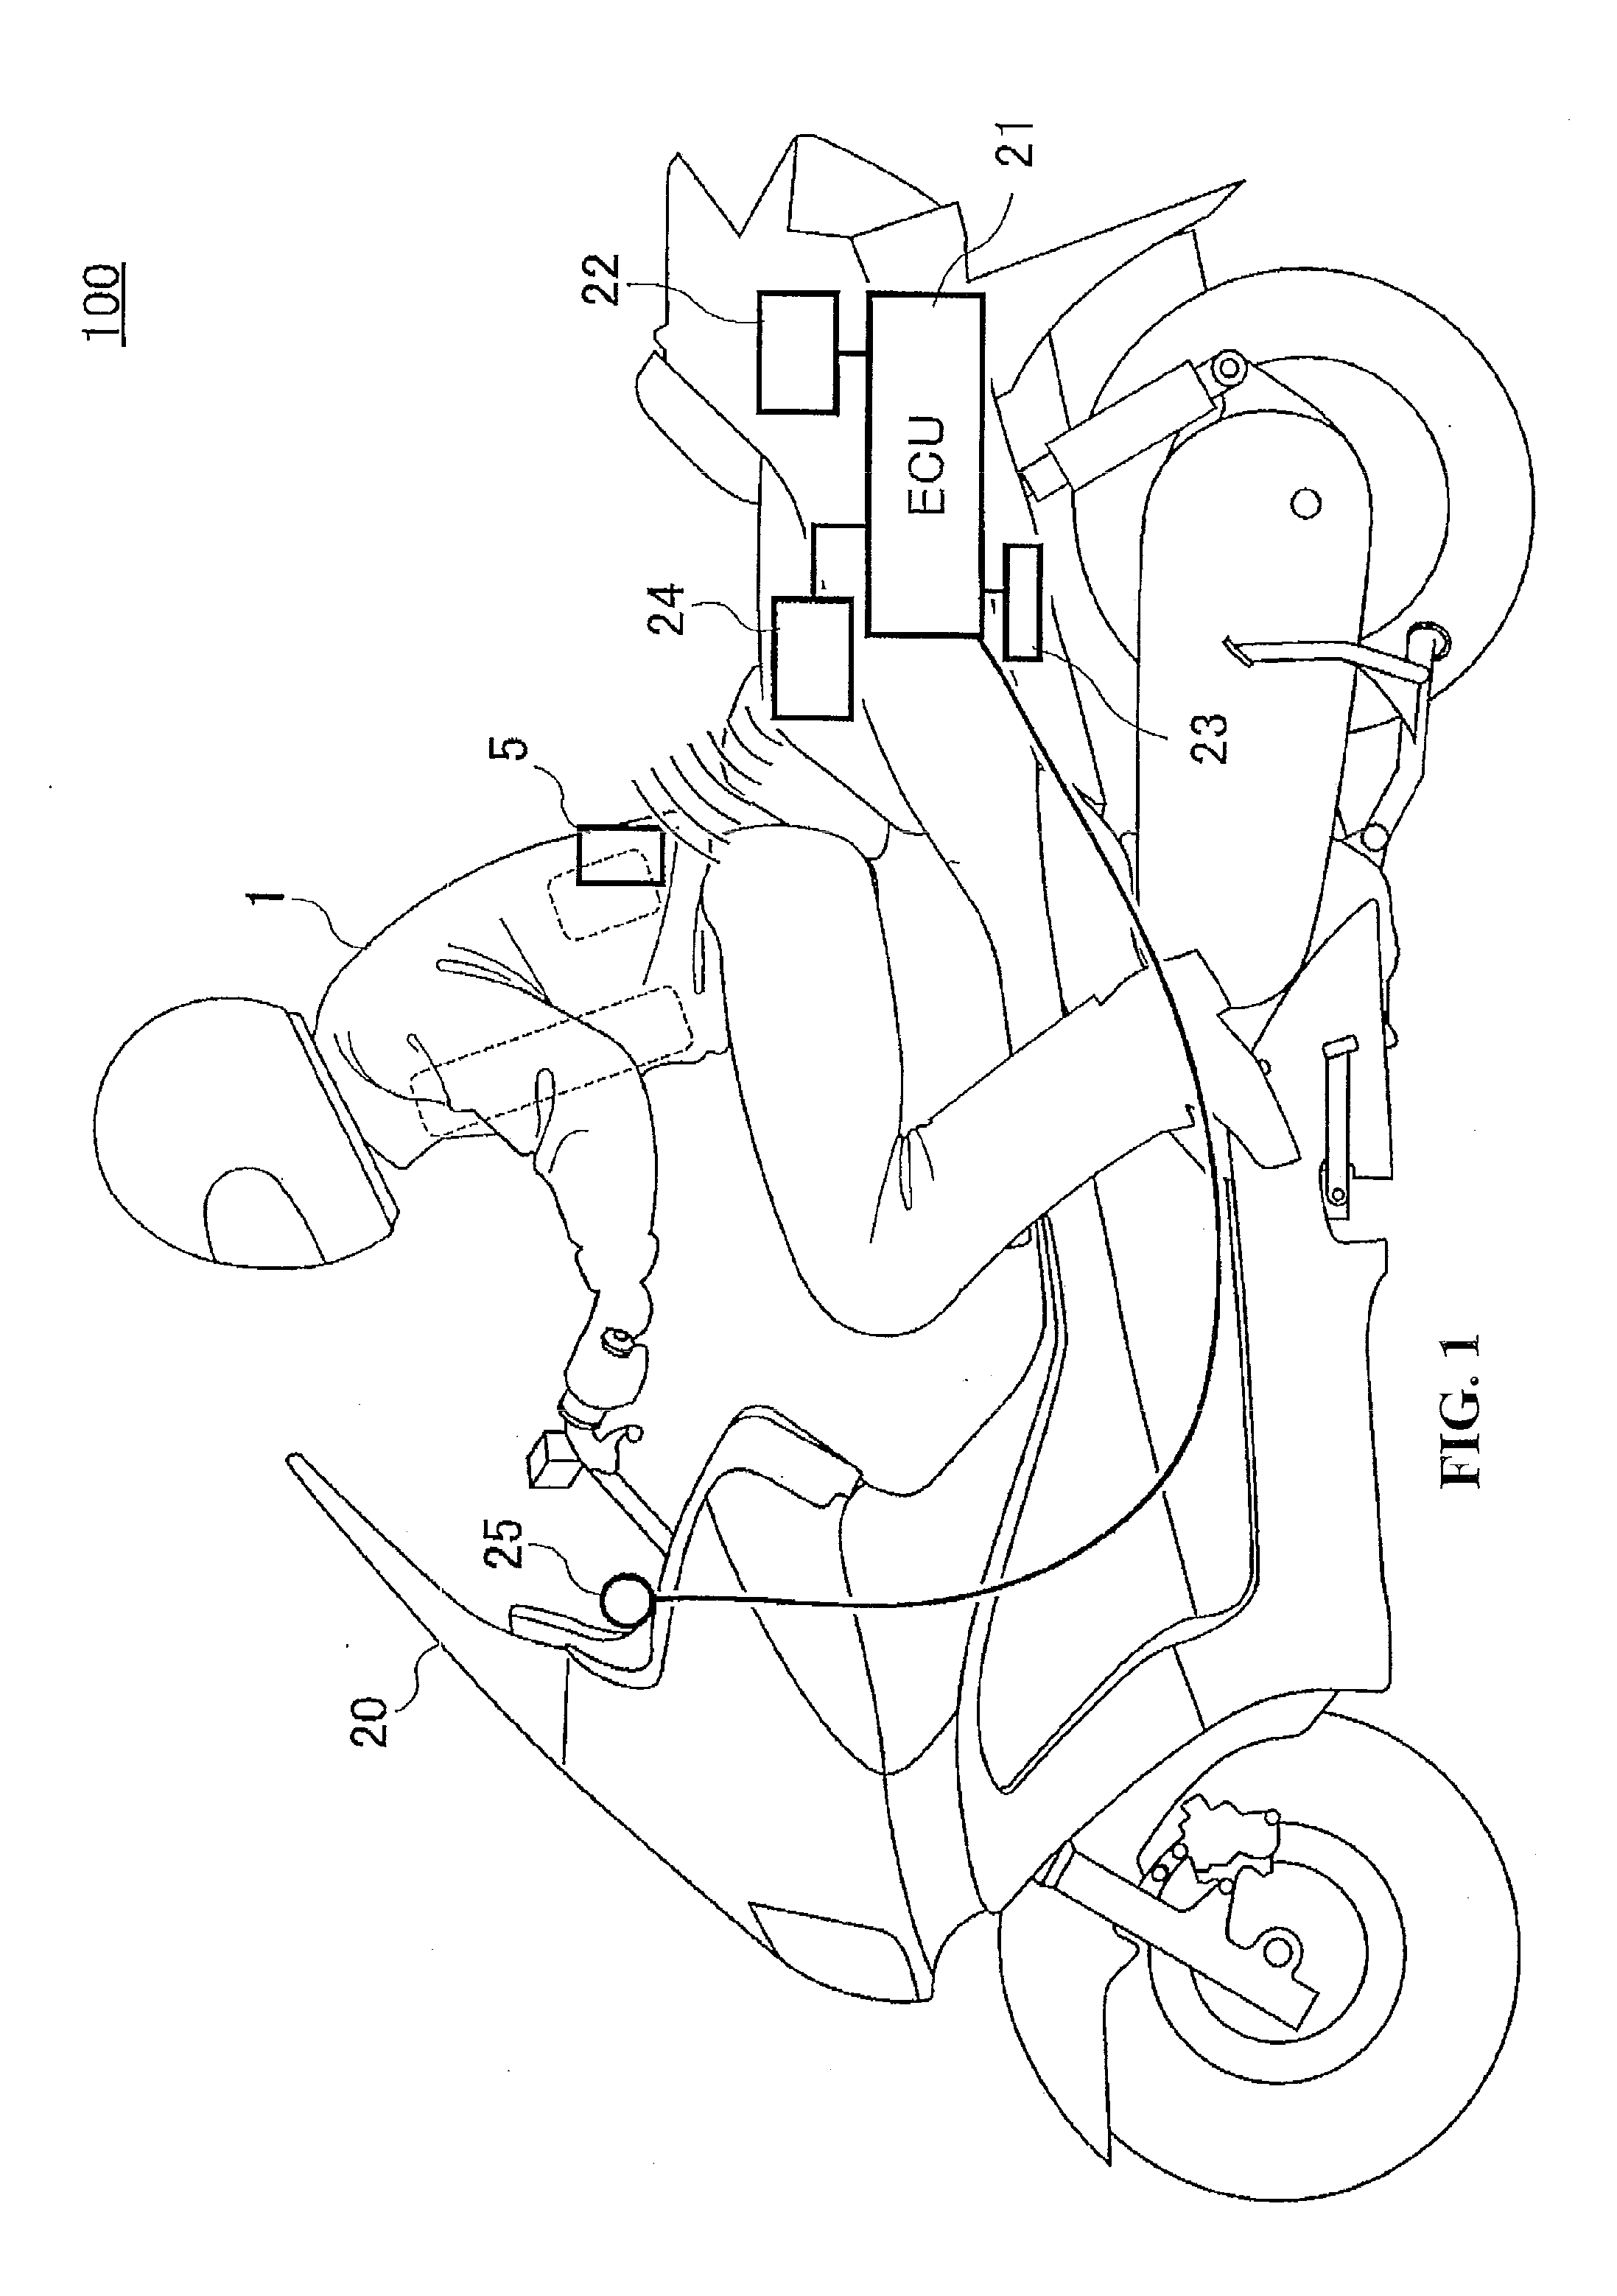 Airbag jacket activating system